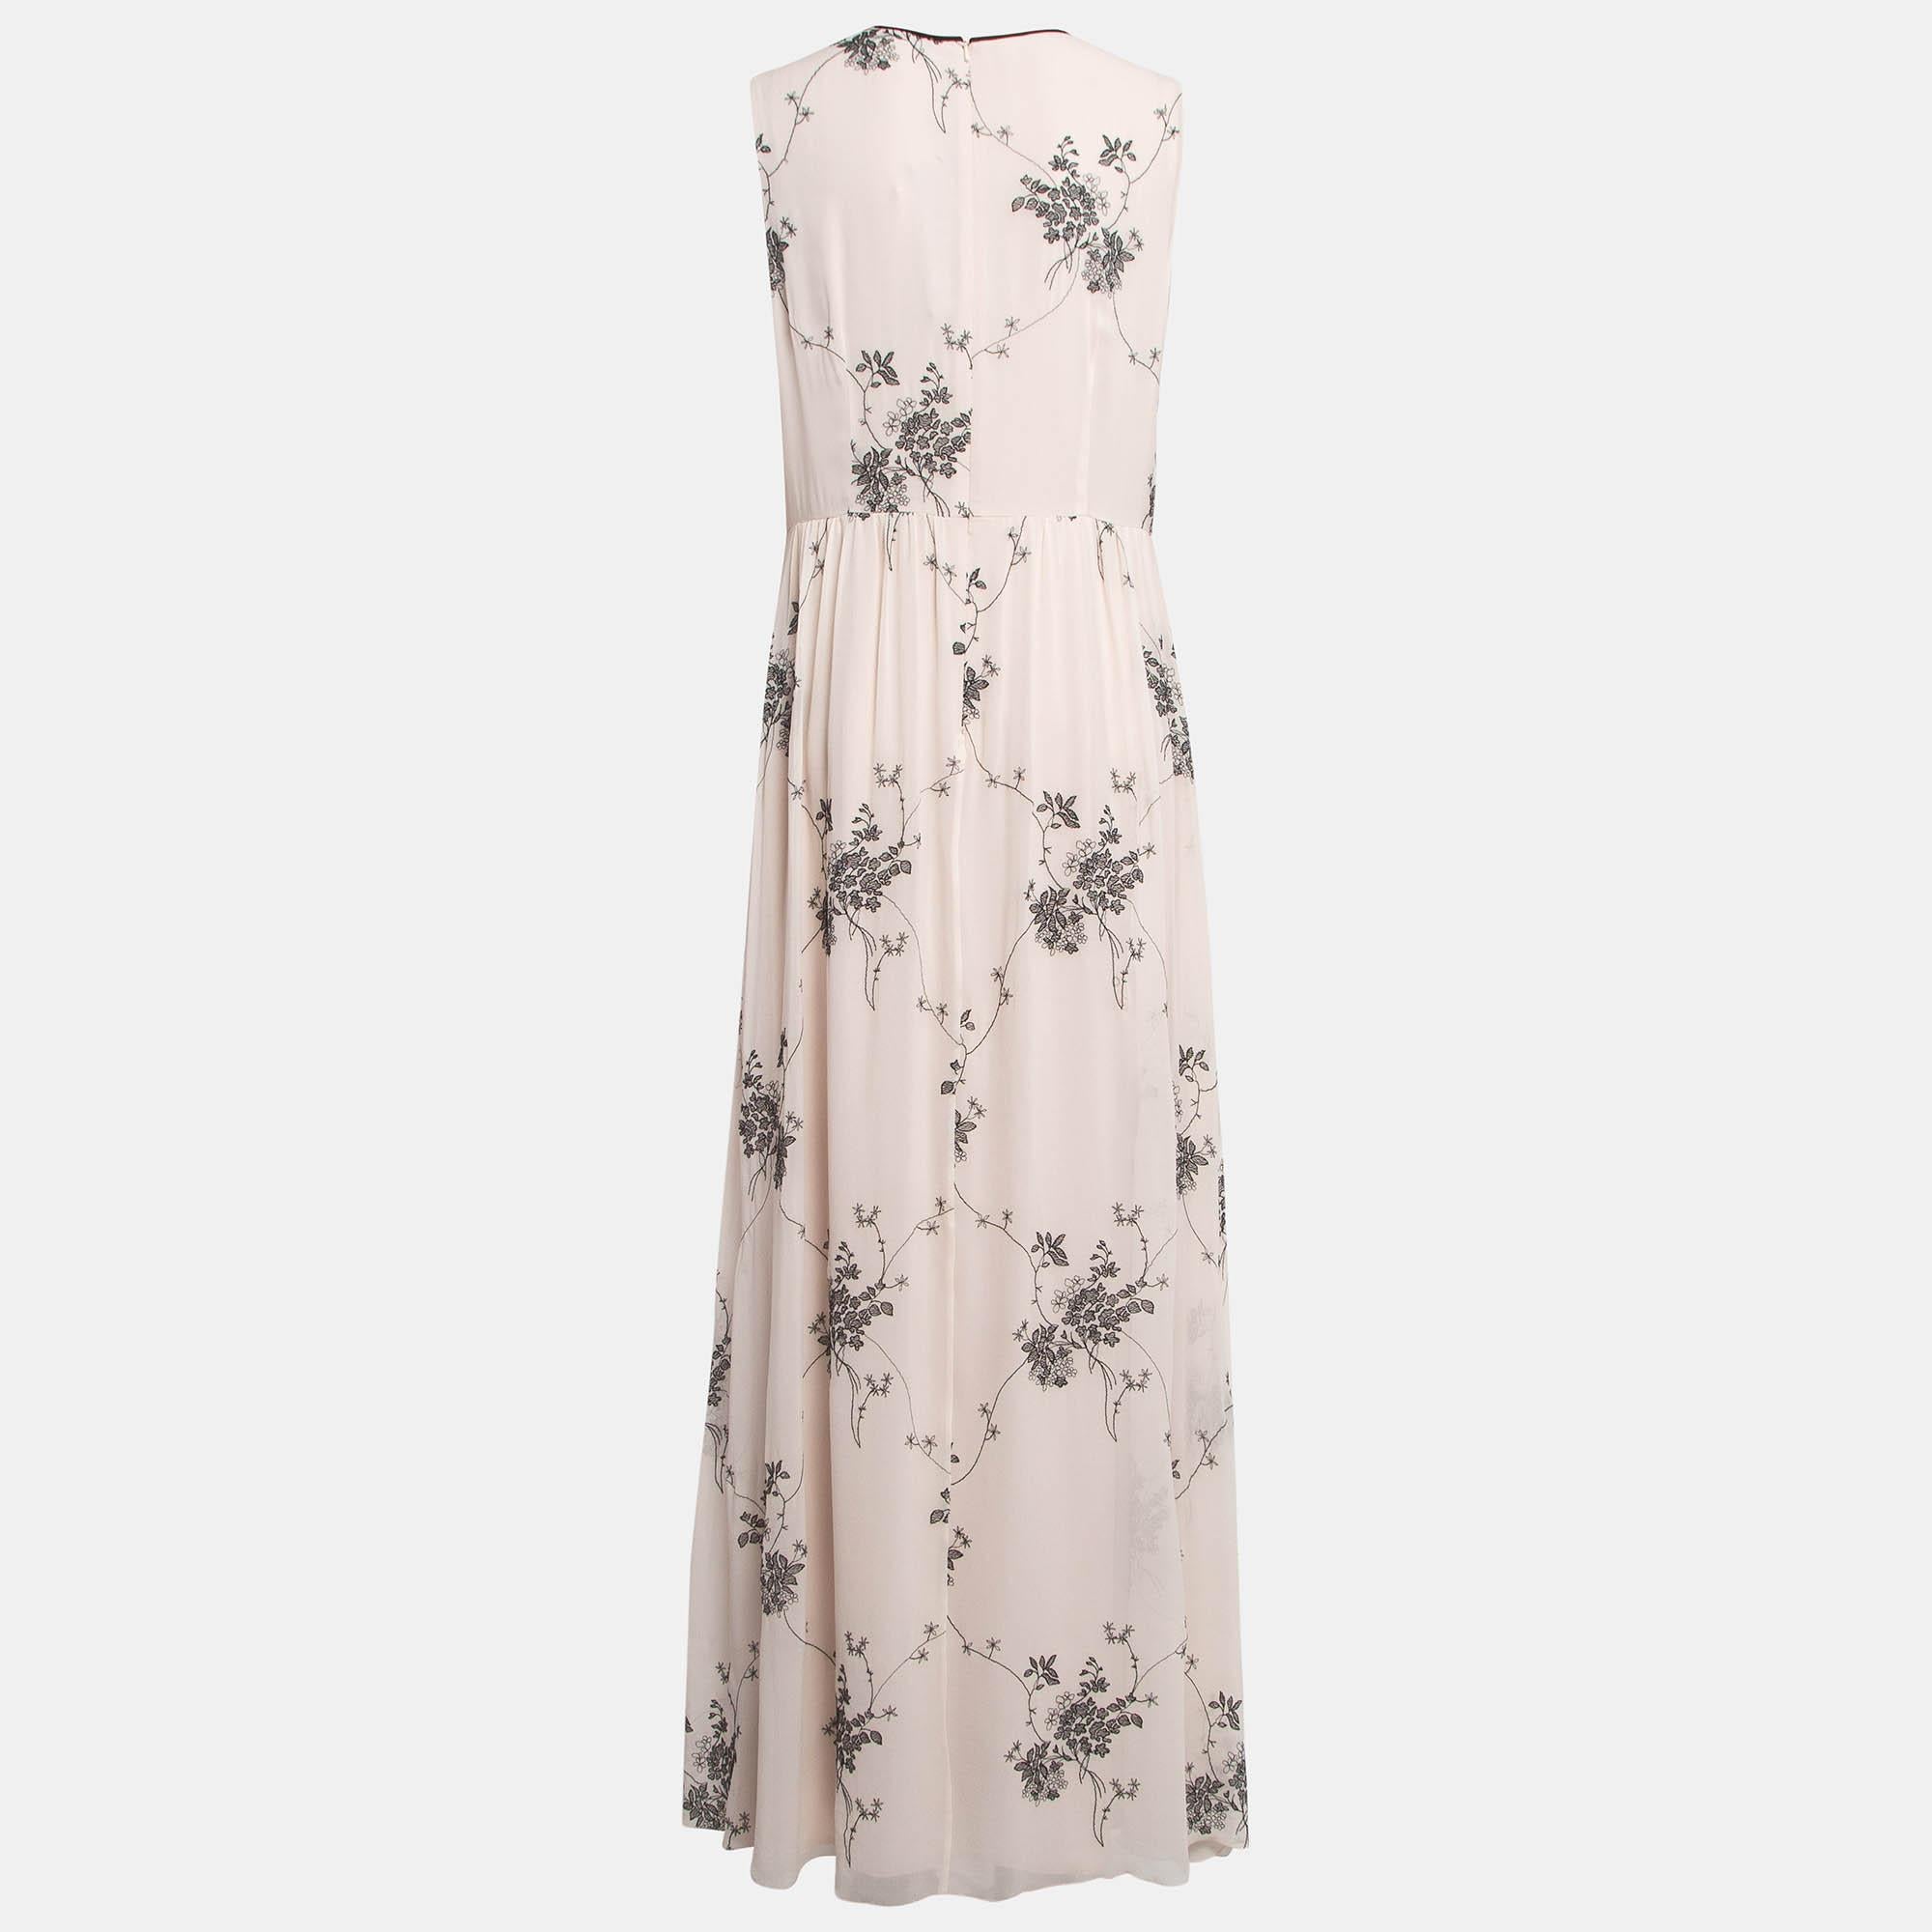 Delicately crafted by Max Mara Studio, the Theodor dress exudes refined charm. Its soft silk fabric drapes gracefully, adorned with intricate floral embroidery, while ruffle details add a playful touch. This dress epitomizes timeless femininity with